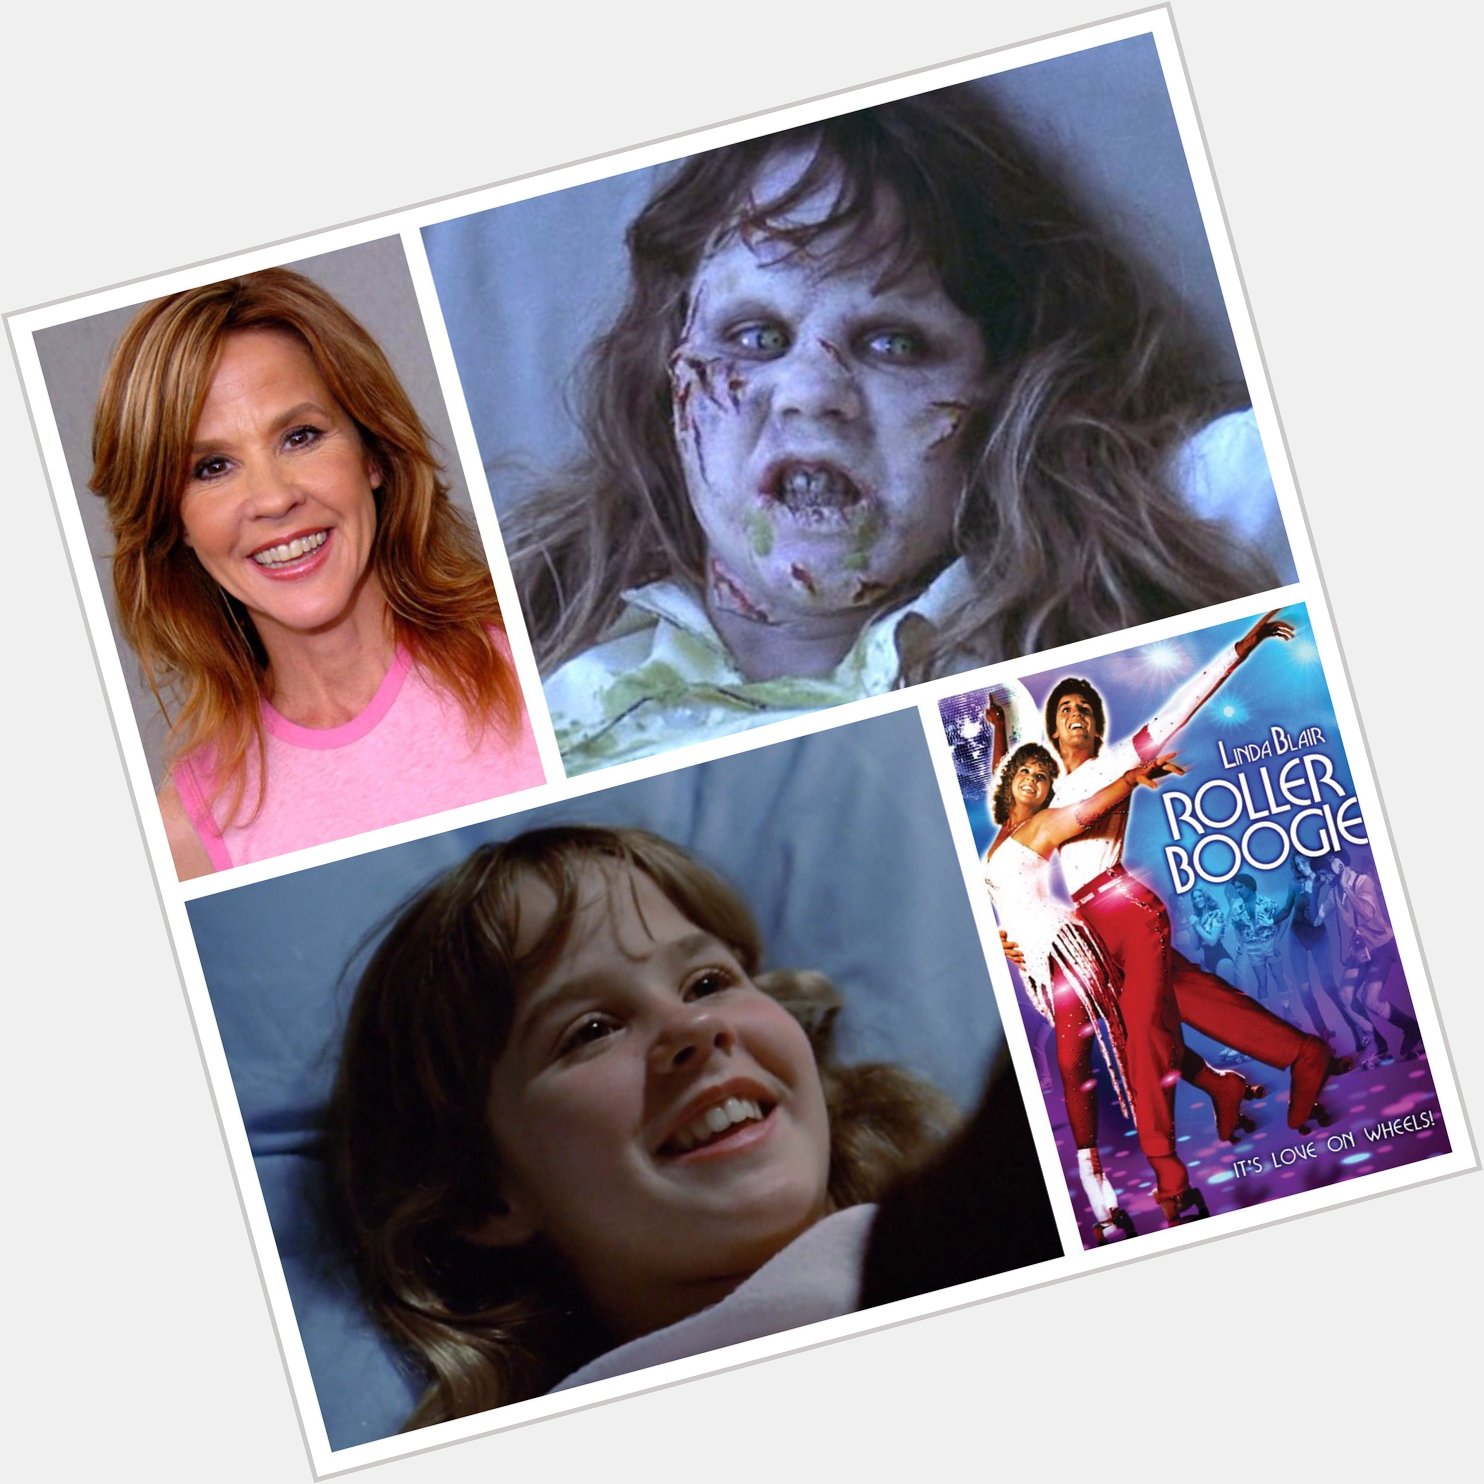 Happy Birthday, Linda Blair! A true Scream Queen and First Lady of Horror. 